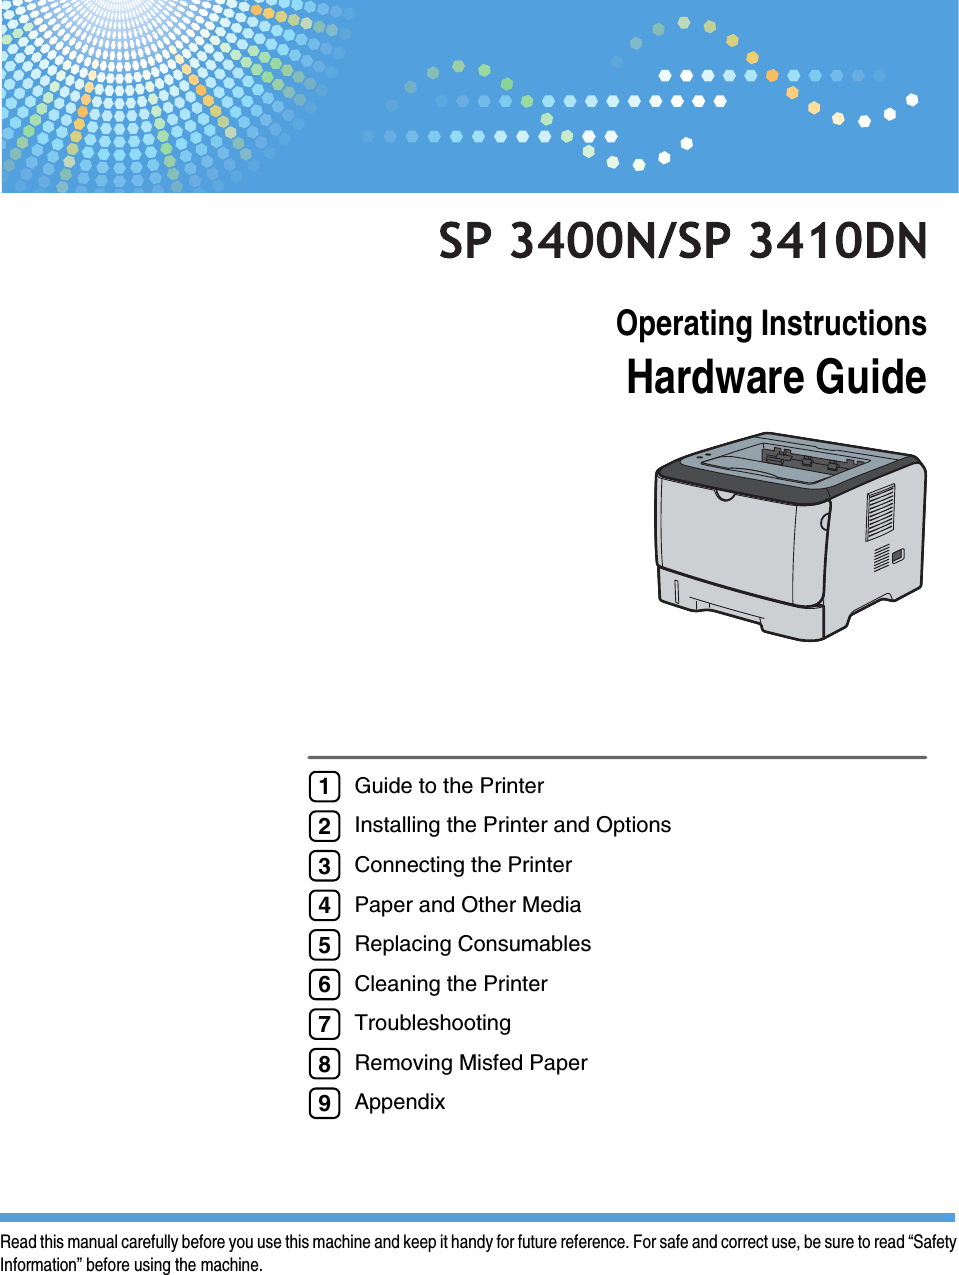 Operating InstructionsHardware GuideRead this manual carefully before you use this machine and keep it handy for future reference. For safe and correct use, be sure to read “SafetyInformation” before using the machine.Guide to the PrinterInstalling the Printer and OptionsConnecting the PrinterPaper and Other MediaReplacing ConsumablesCleaning the PrinterTroubleshootingRemoving Misfed PaperAppendix123456789